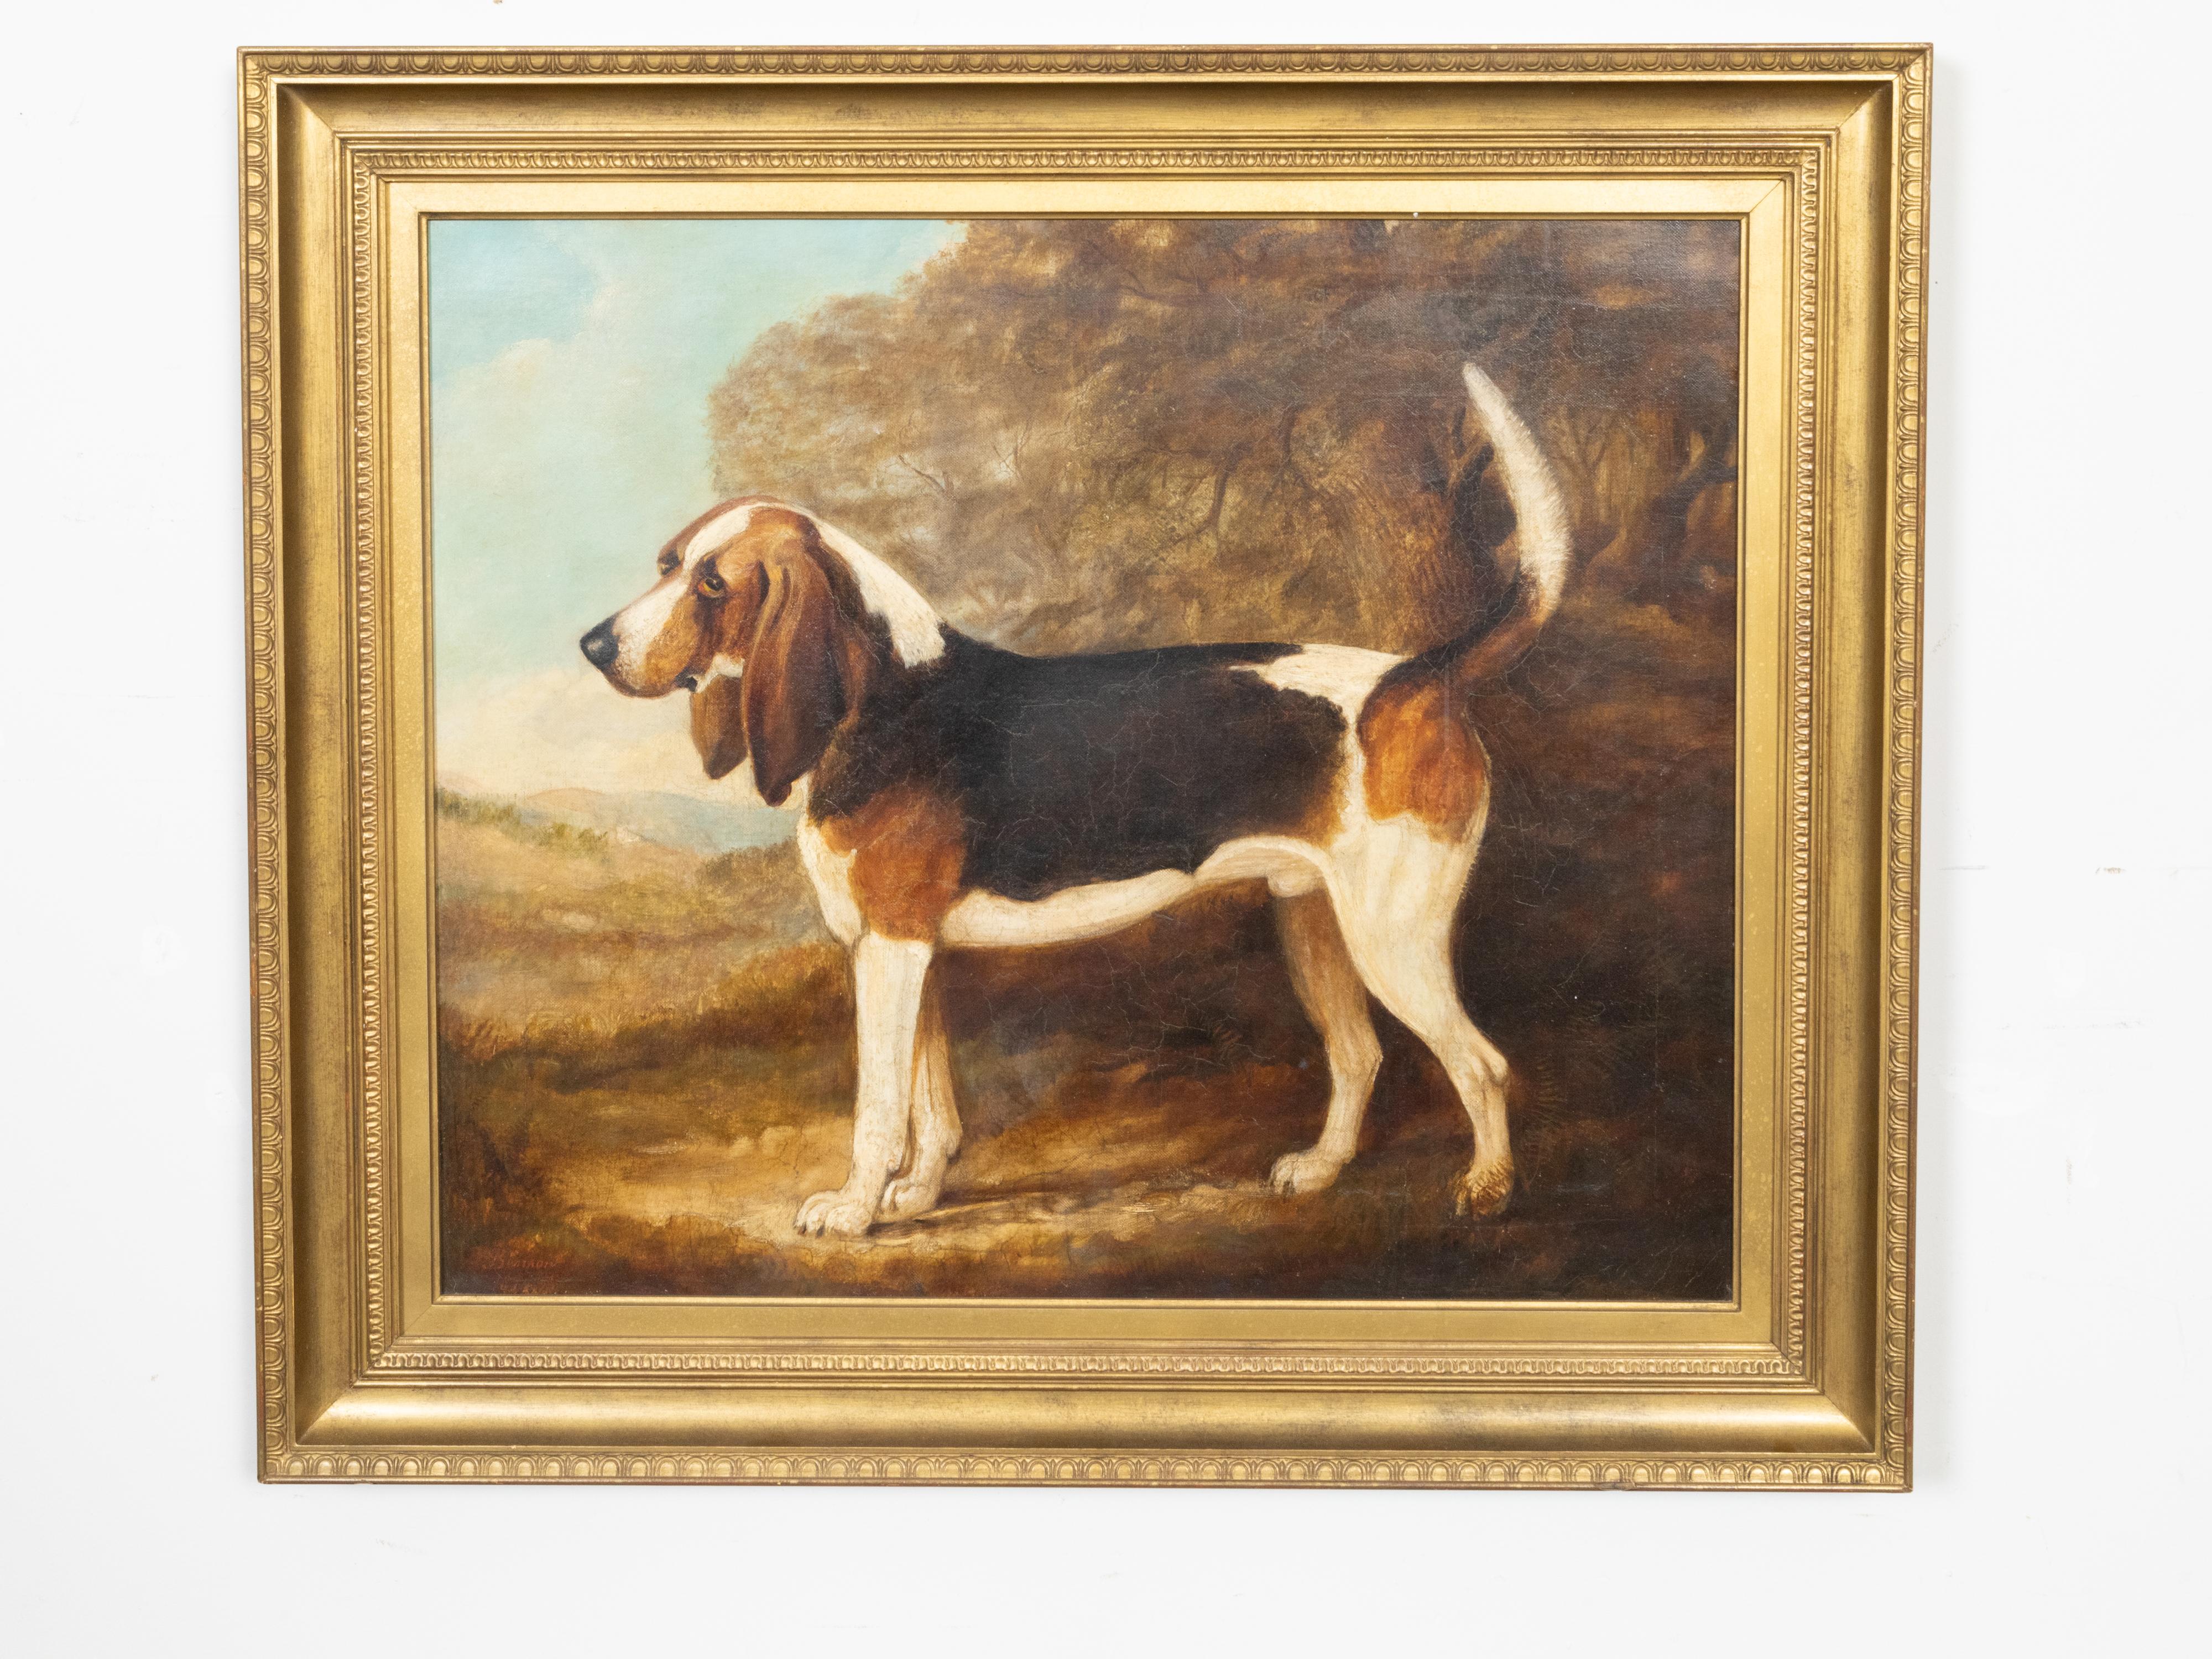 An English oil on canvas horizontal painting from the mid 19th century, signed and dated, depicting a stationary bloodhound hunting dog, in carved giltwood frame. Created in England during the third quarter of the 19th century, this oil on canvas